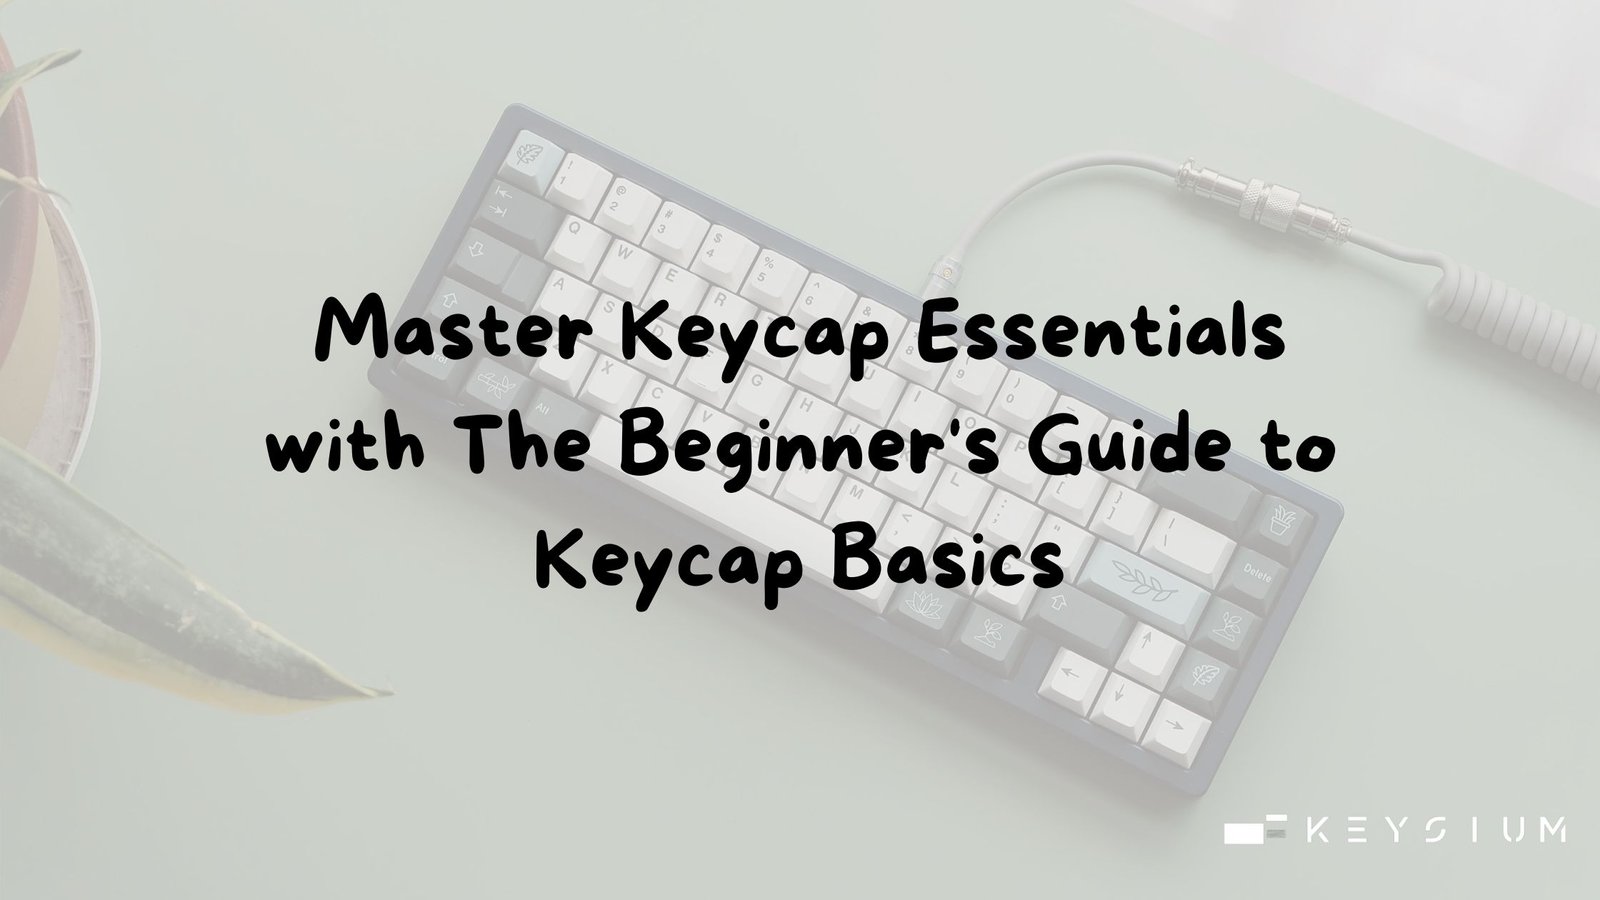 Master Keycap Essentials with The Beginner’s Guide to Keycap Basics